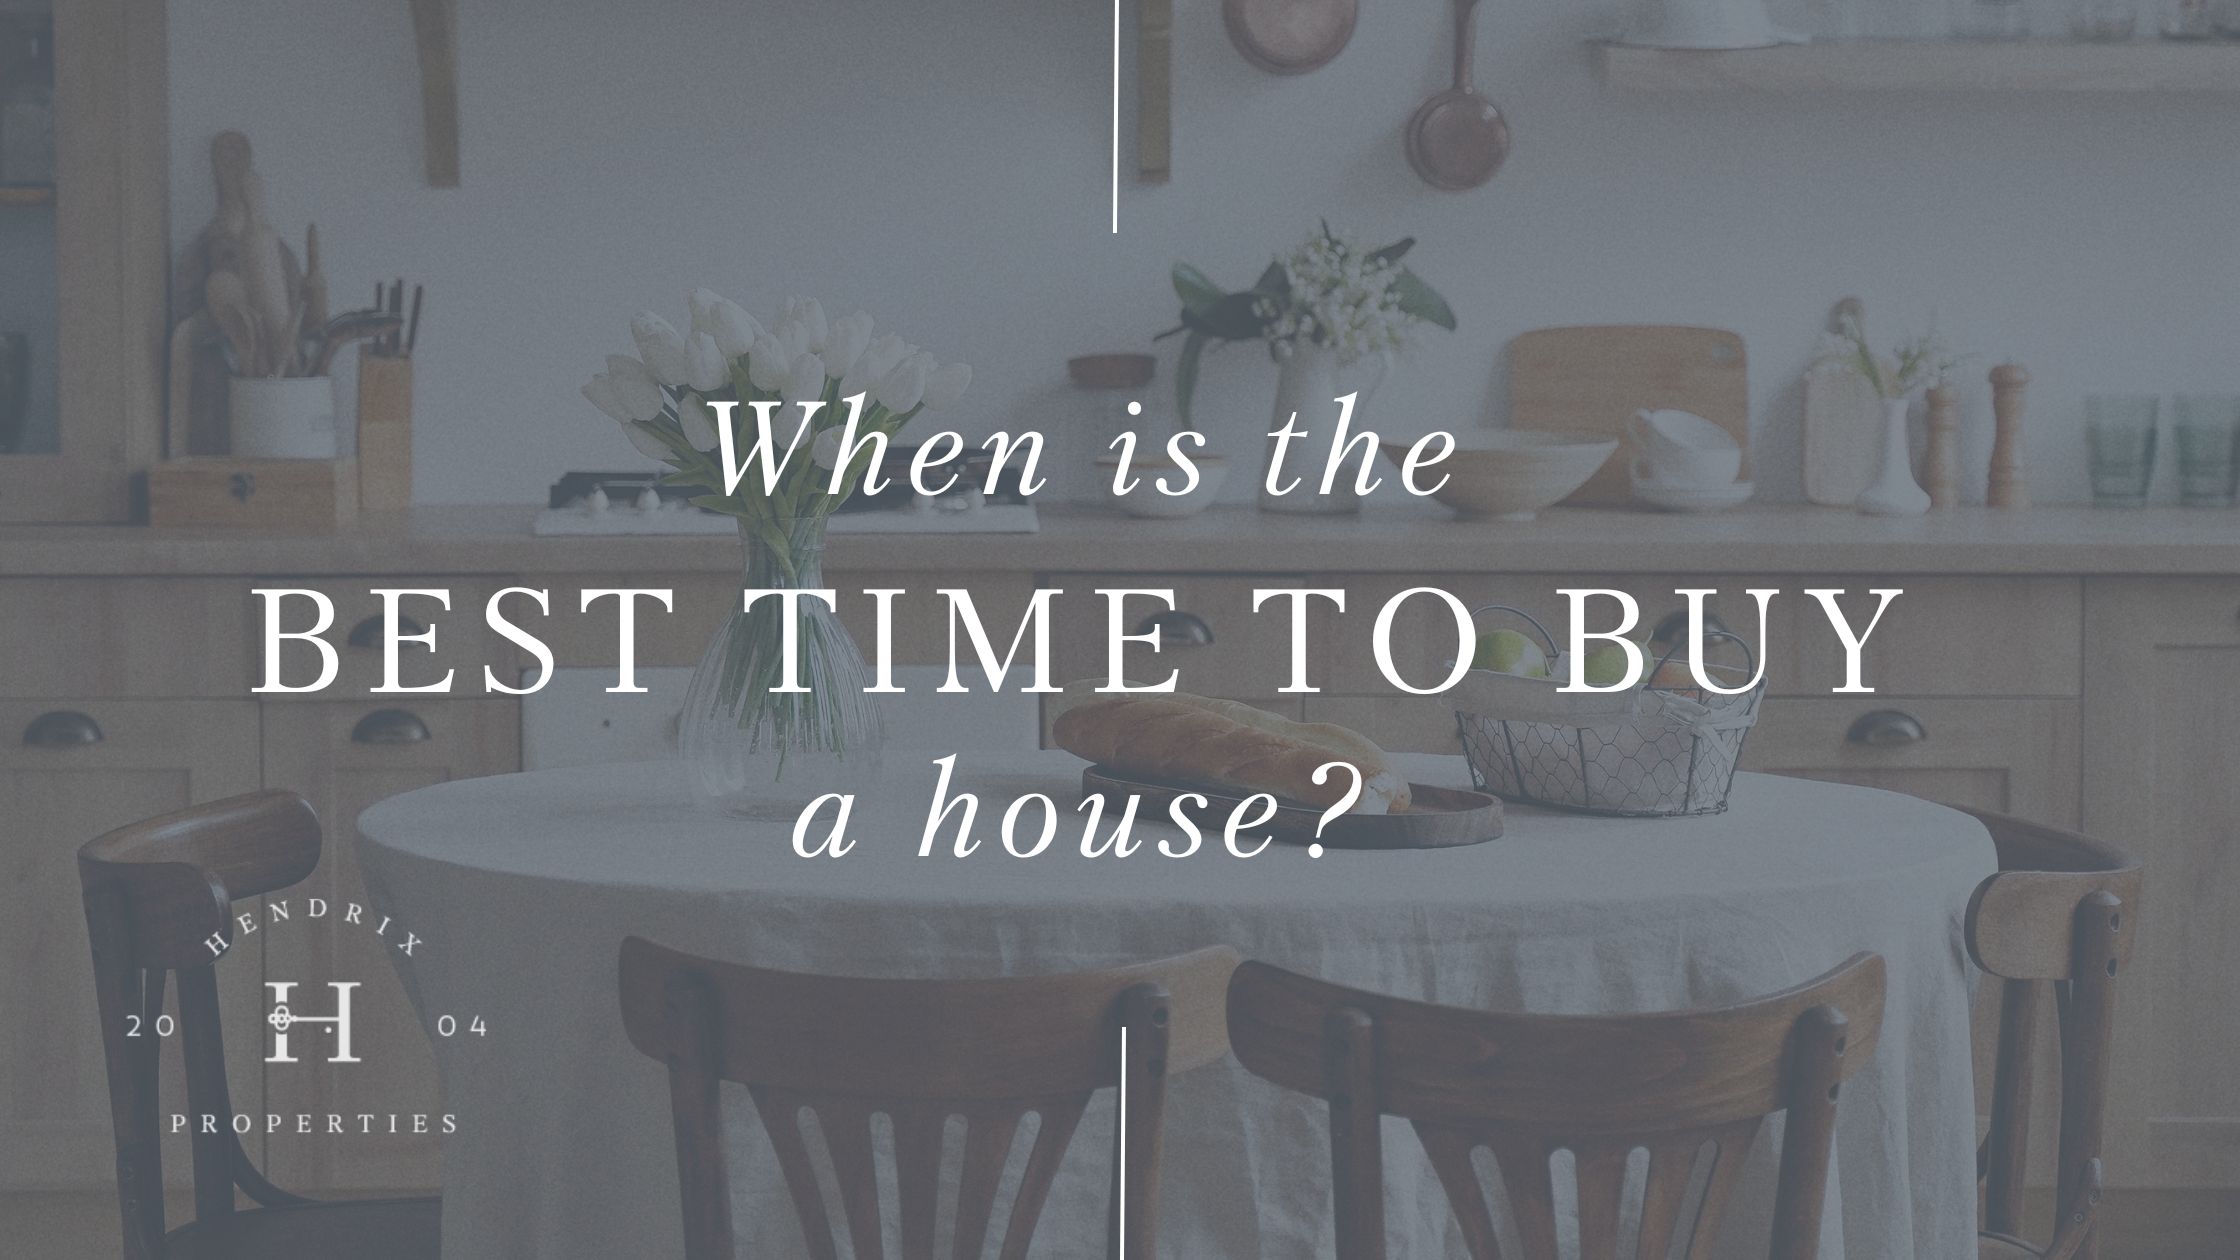 When is the best time to buy a house?